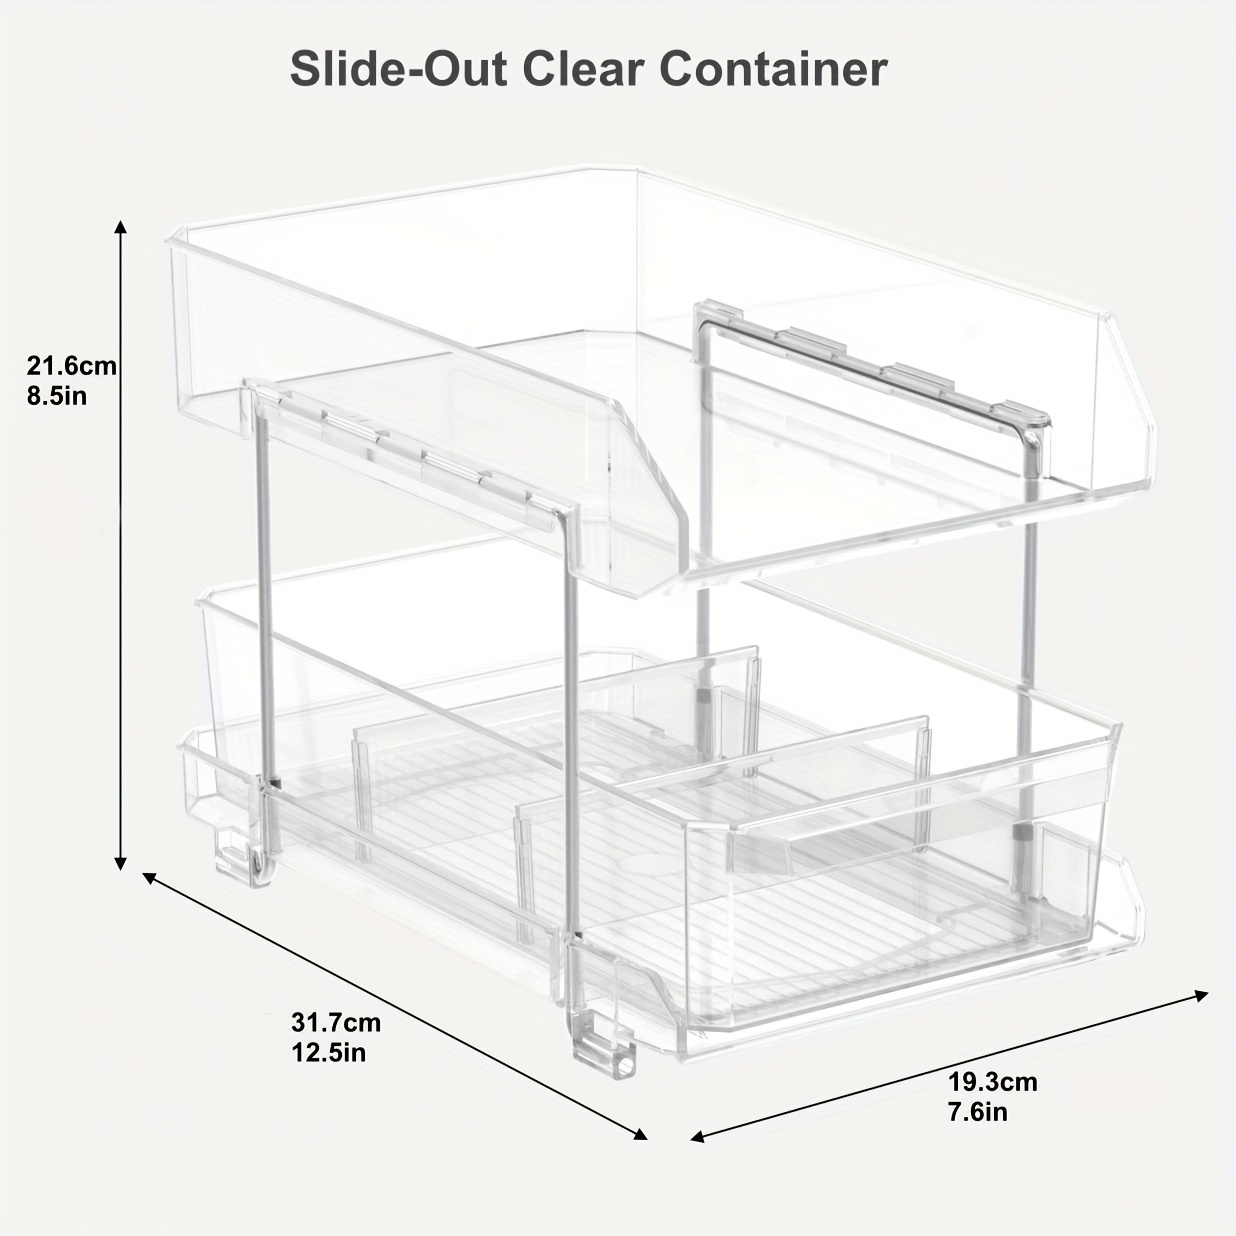 1pc, 2 Tier Clear Organizer With Dividers For Cabinet / Counter, Multi-Use  Slide-Out Storage Container - Kitchen, Pantry, Medicine Cabinet Storage Bin